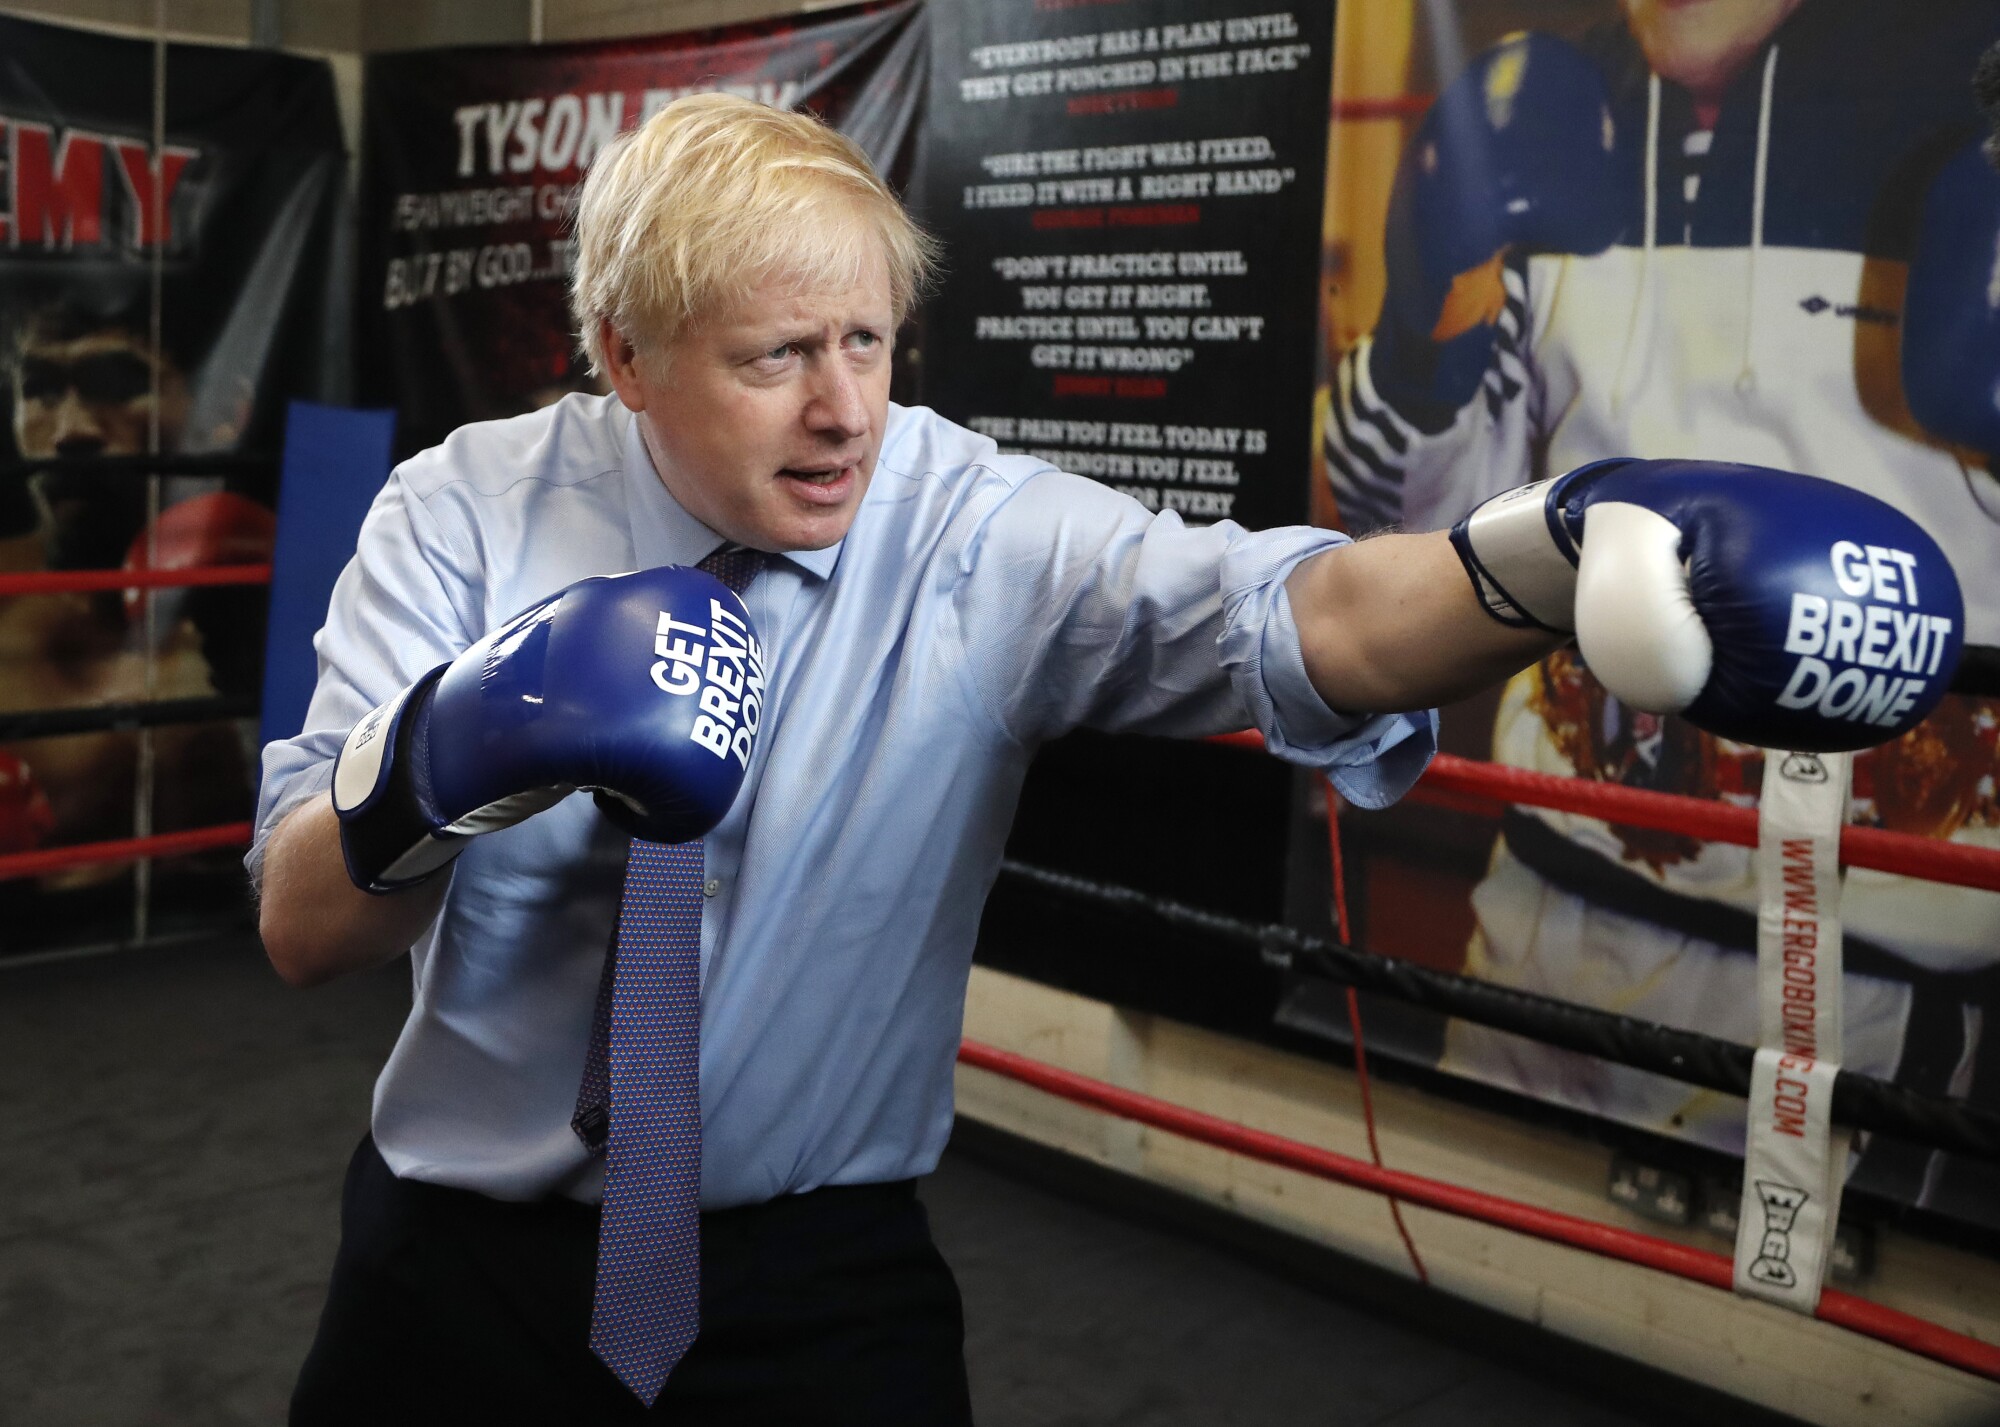 British Prime Minister Boris Johnson was photographed wearing boxing gloves during the stoppage.